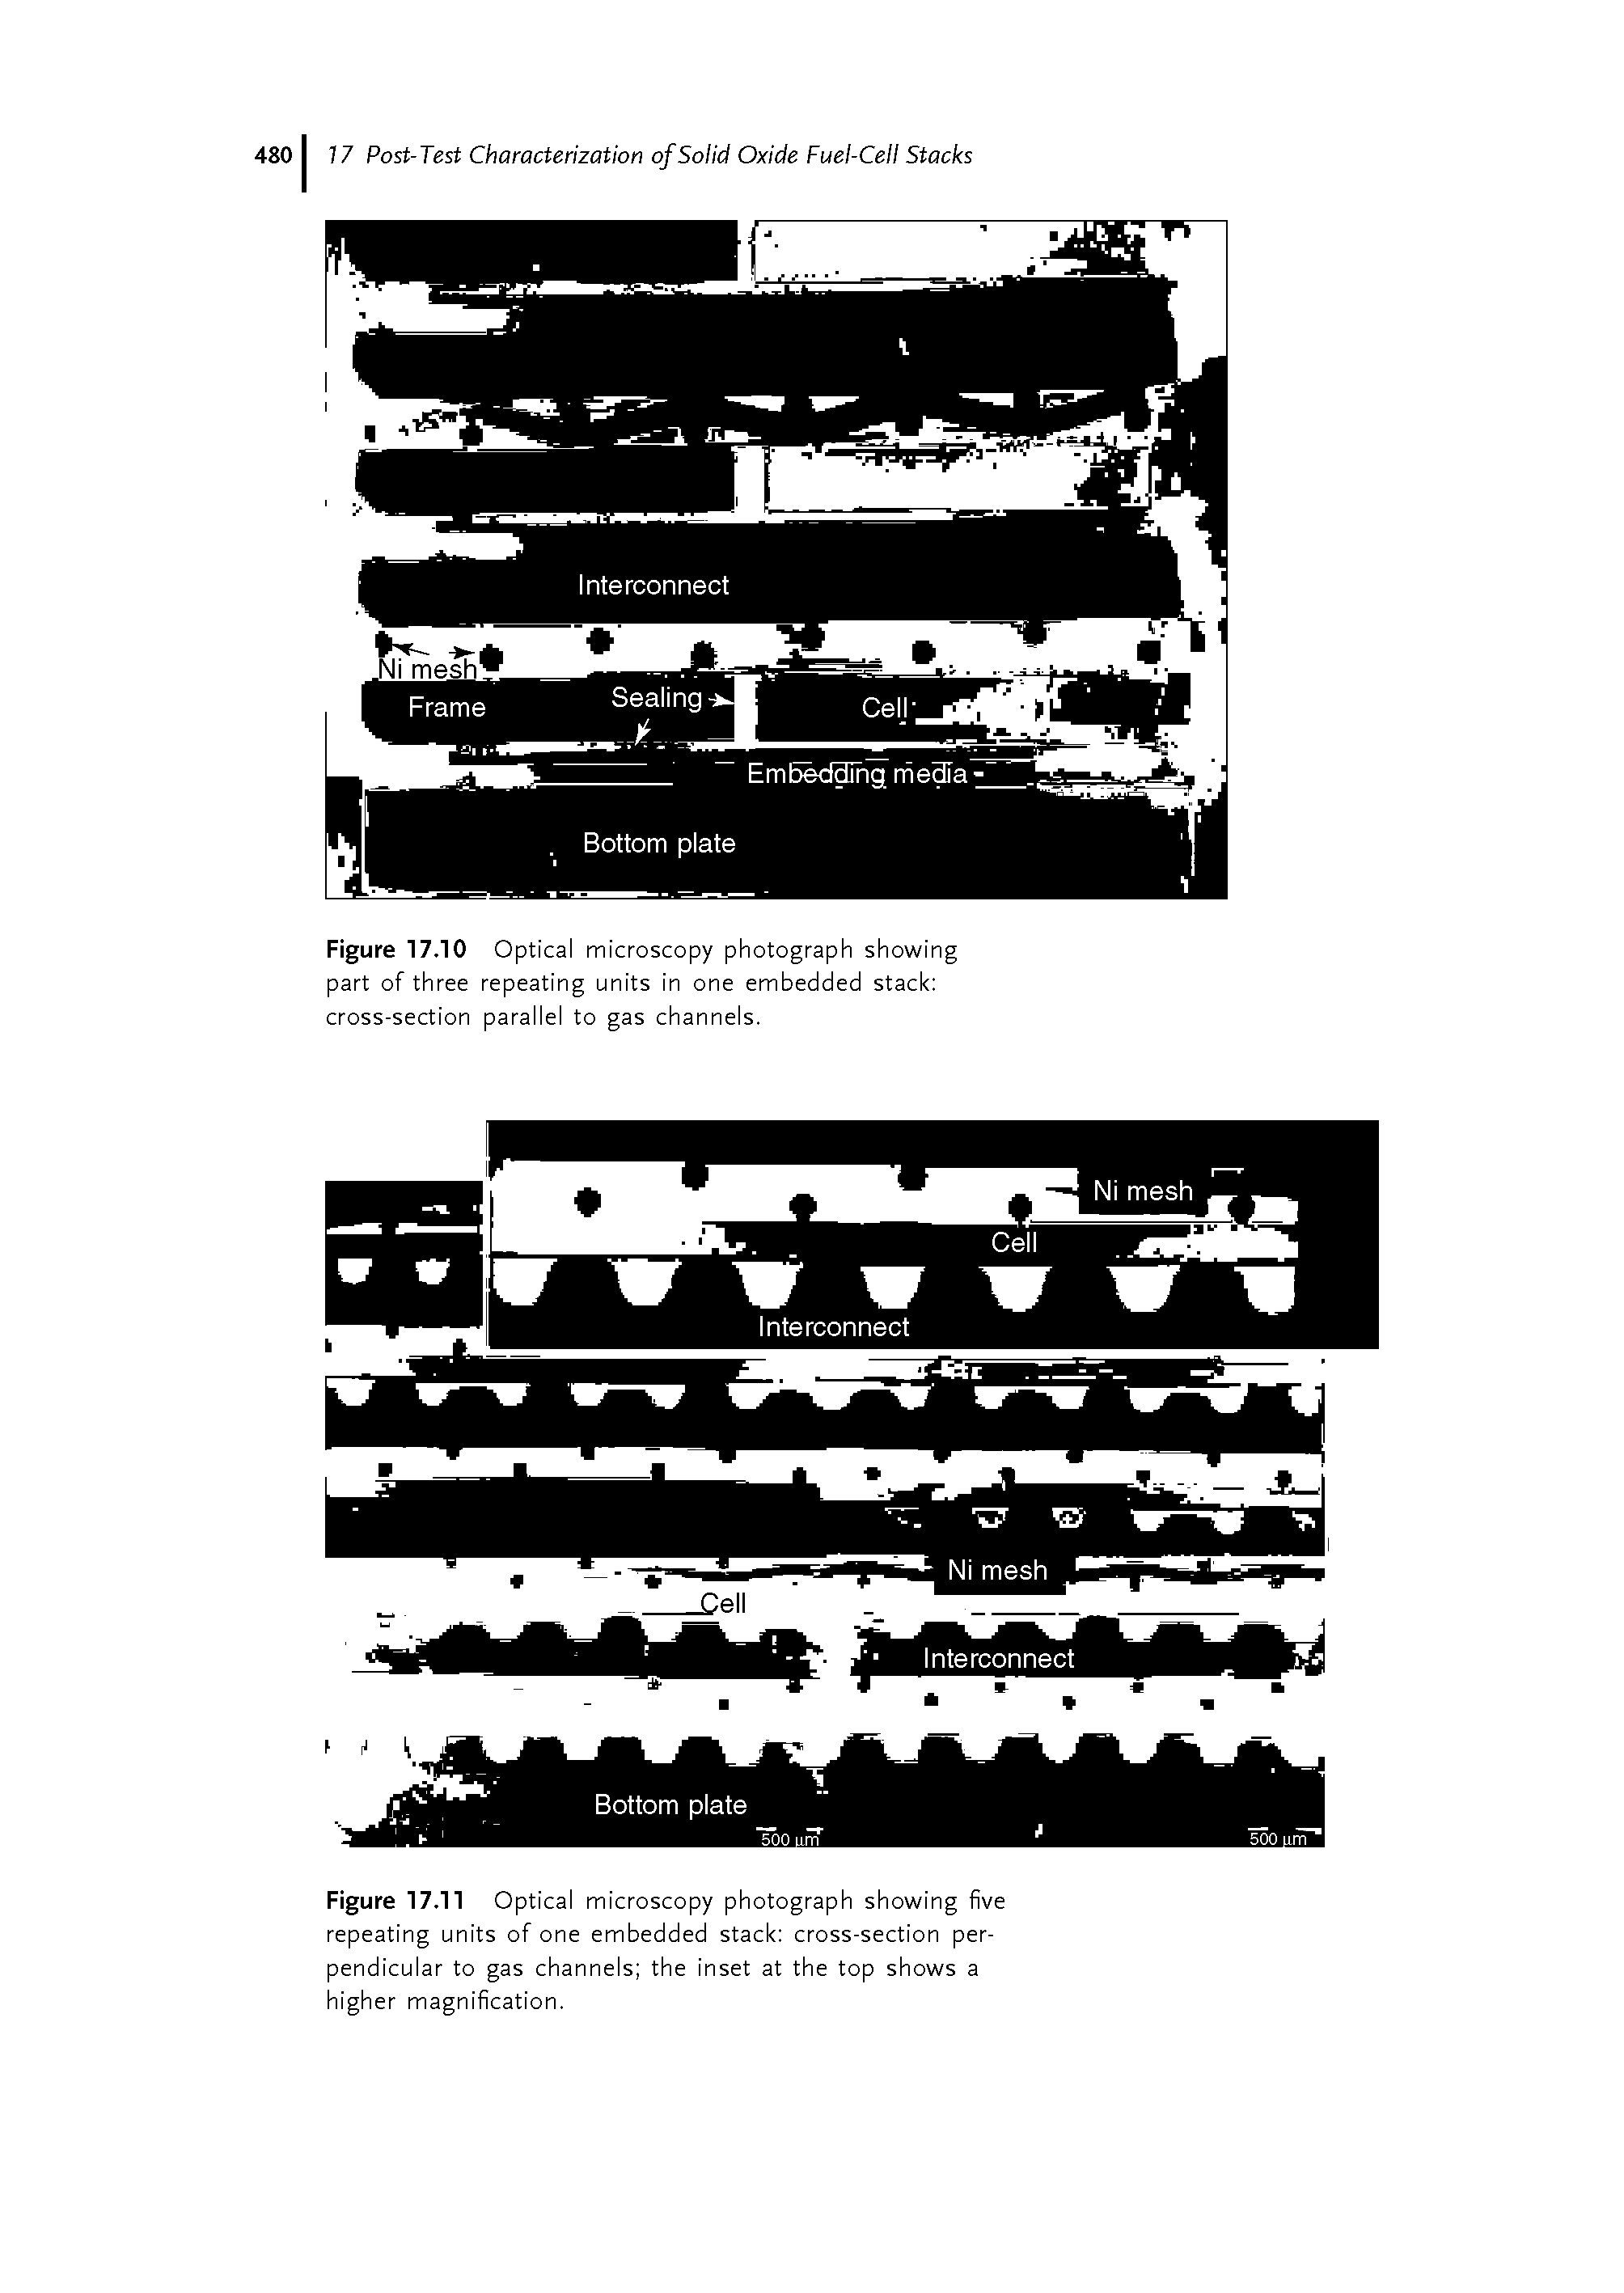 Figure 17.10 Optical microscopy photograph showing part of three repeating units in one embedded stack cross-section parallel to gas channels.